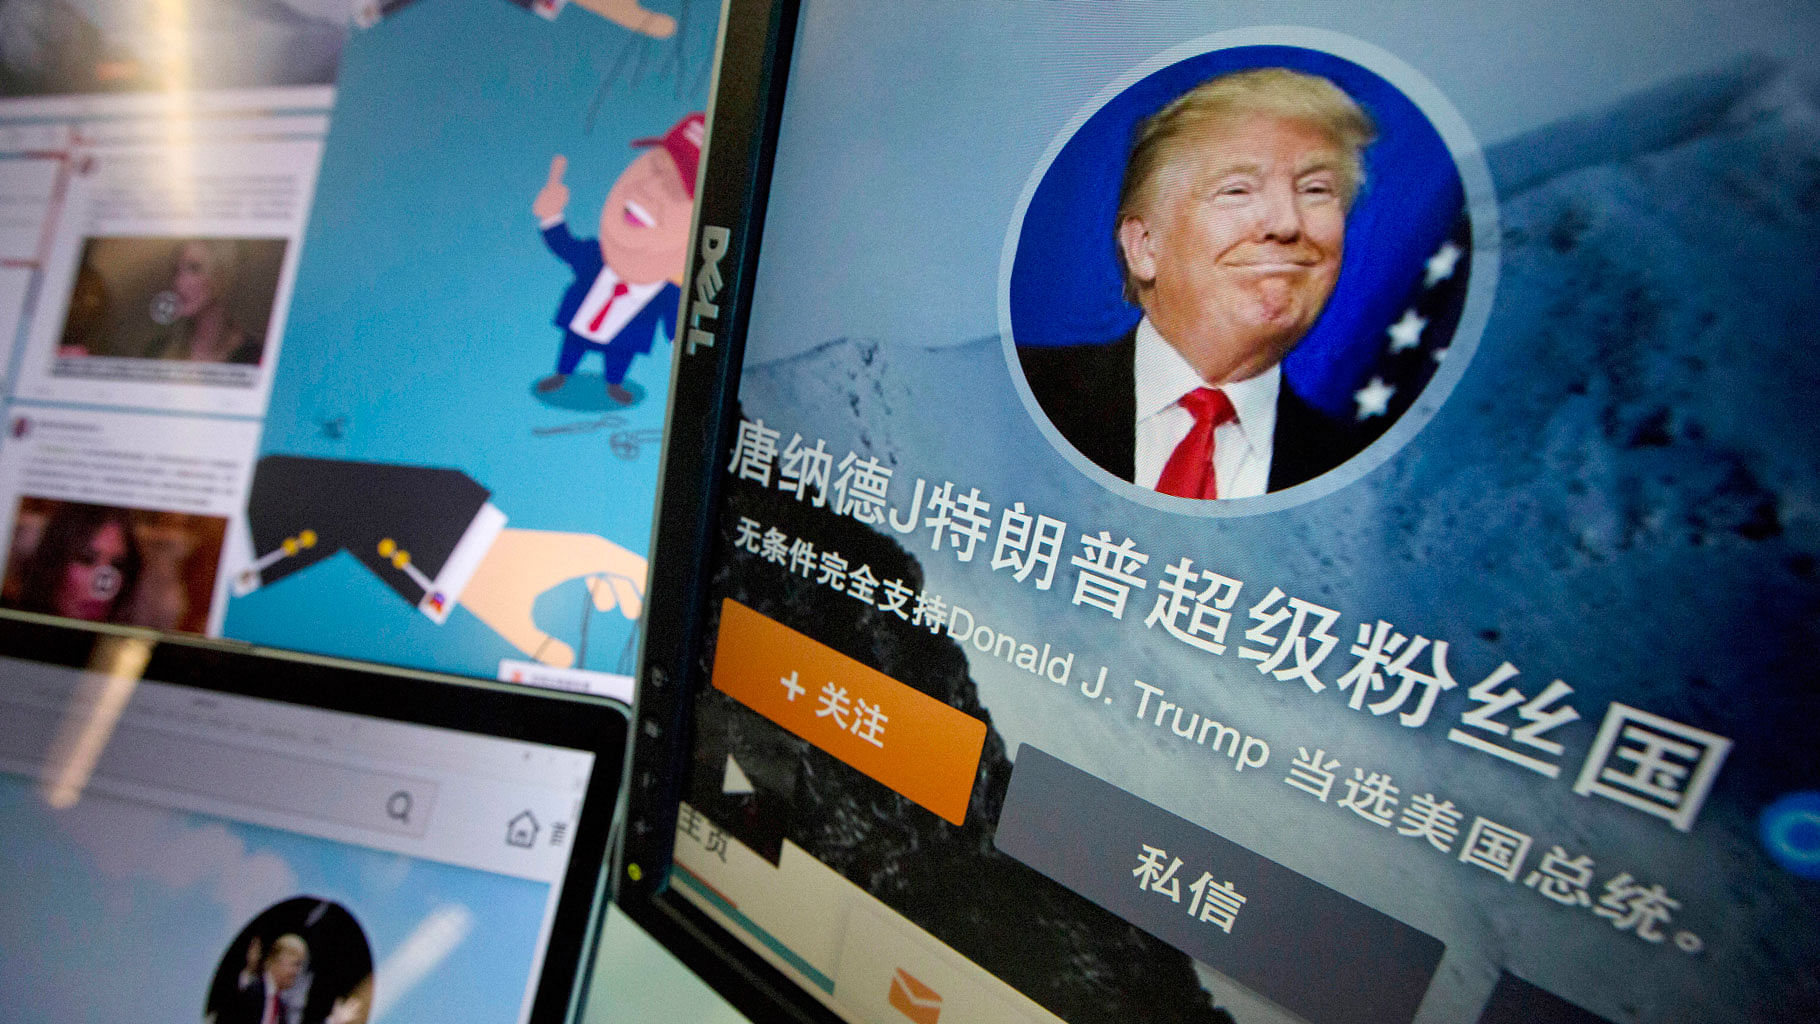 In this 18 May 2016 photo, Chinese fan websites for Donald Trump are displayed on a computer with the words “Donald J Trump super fan nation, Full and unconditional support for Donald J Trump to be elected US president”. (Photo: AP)